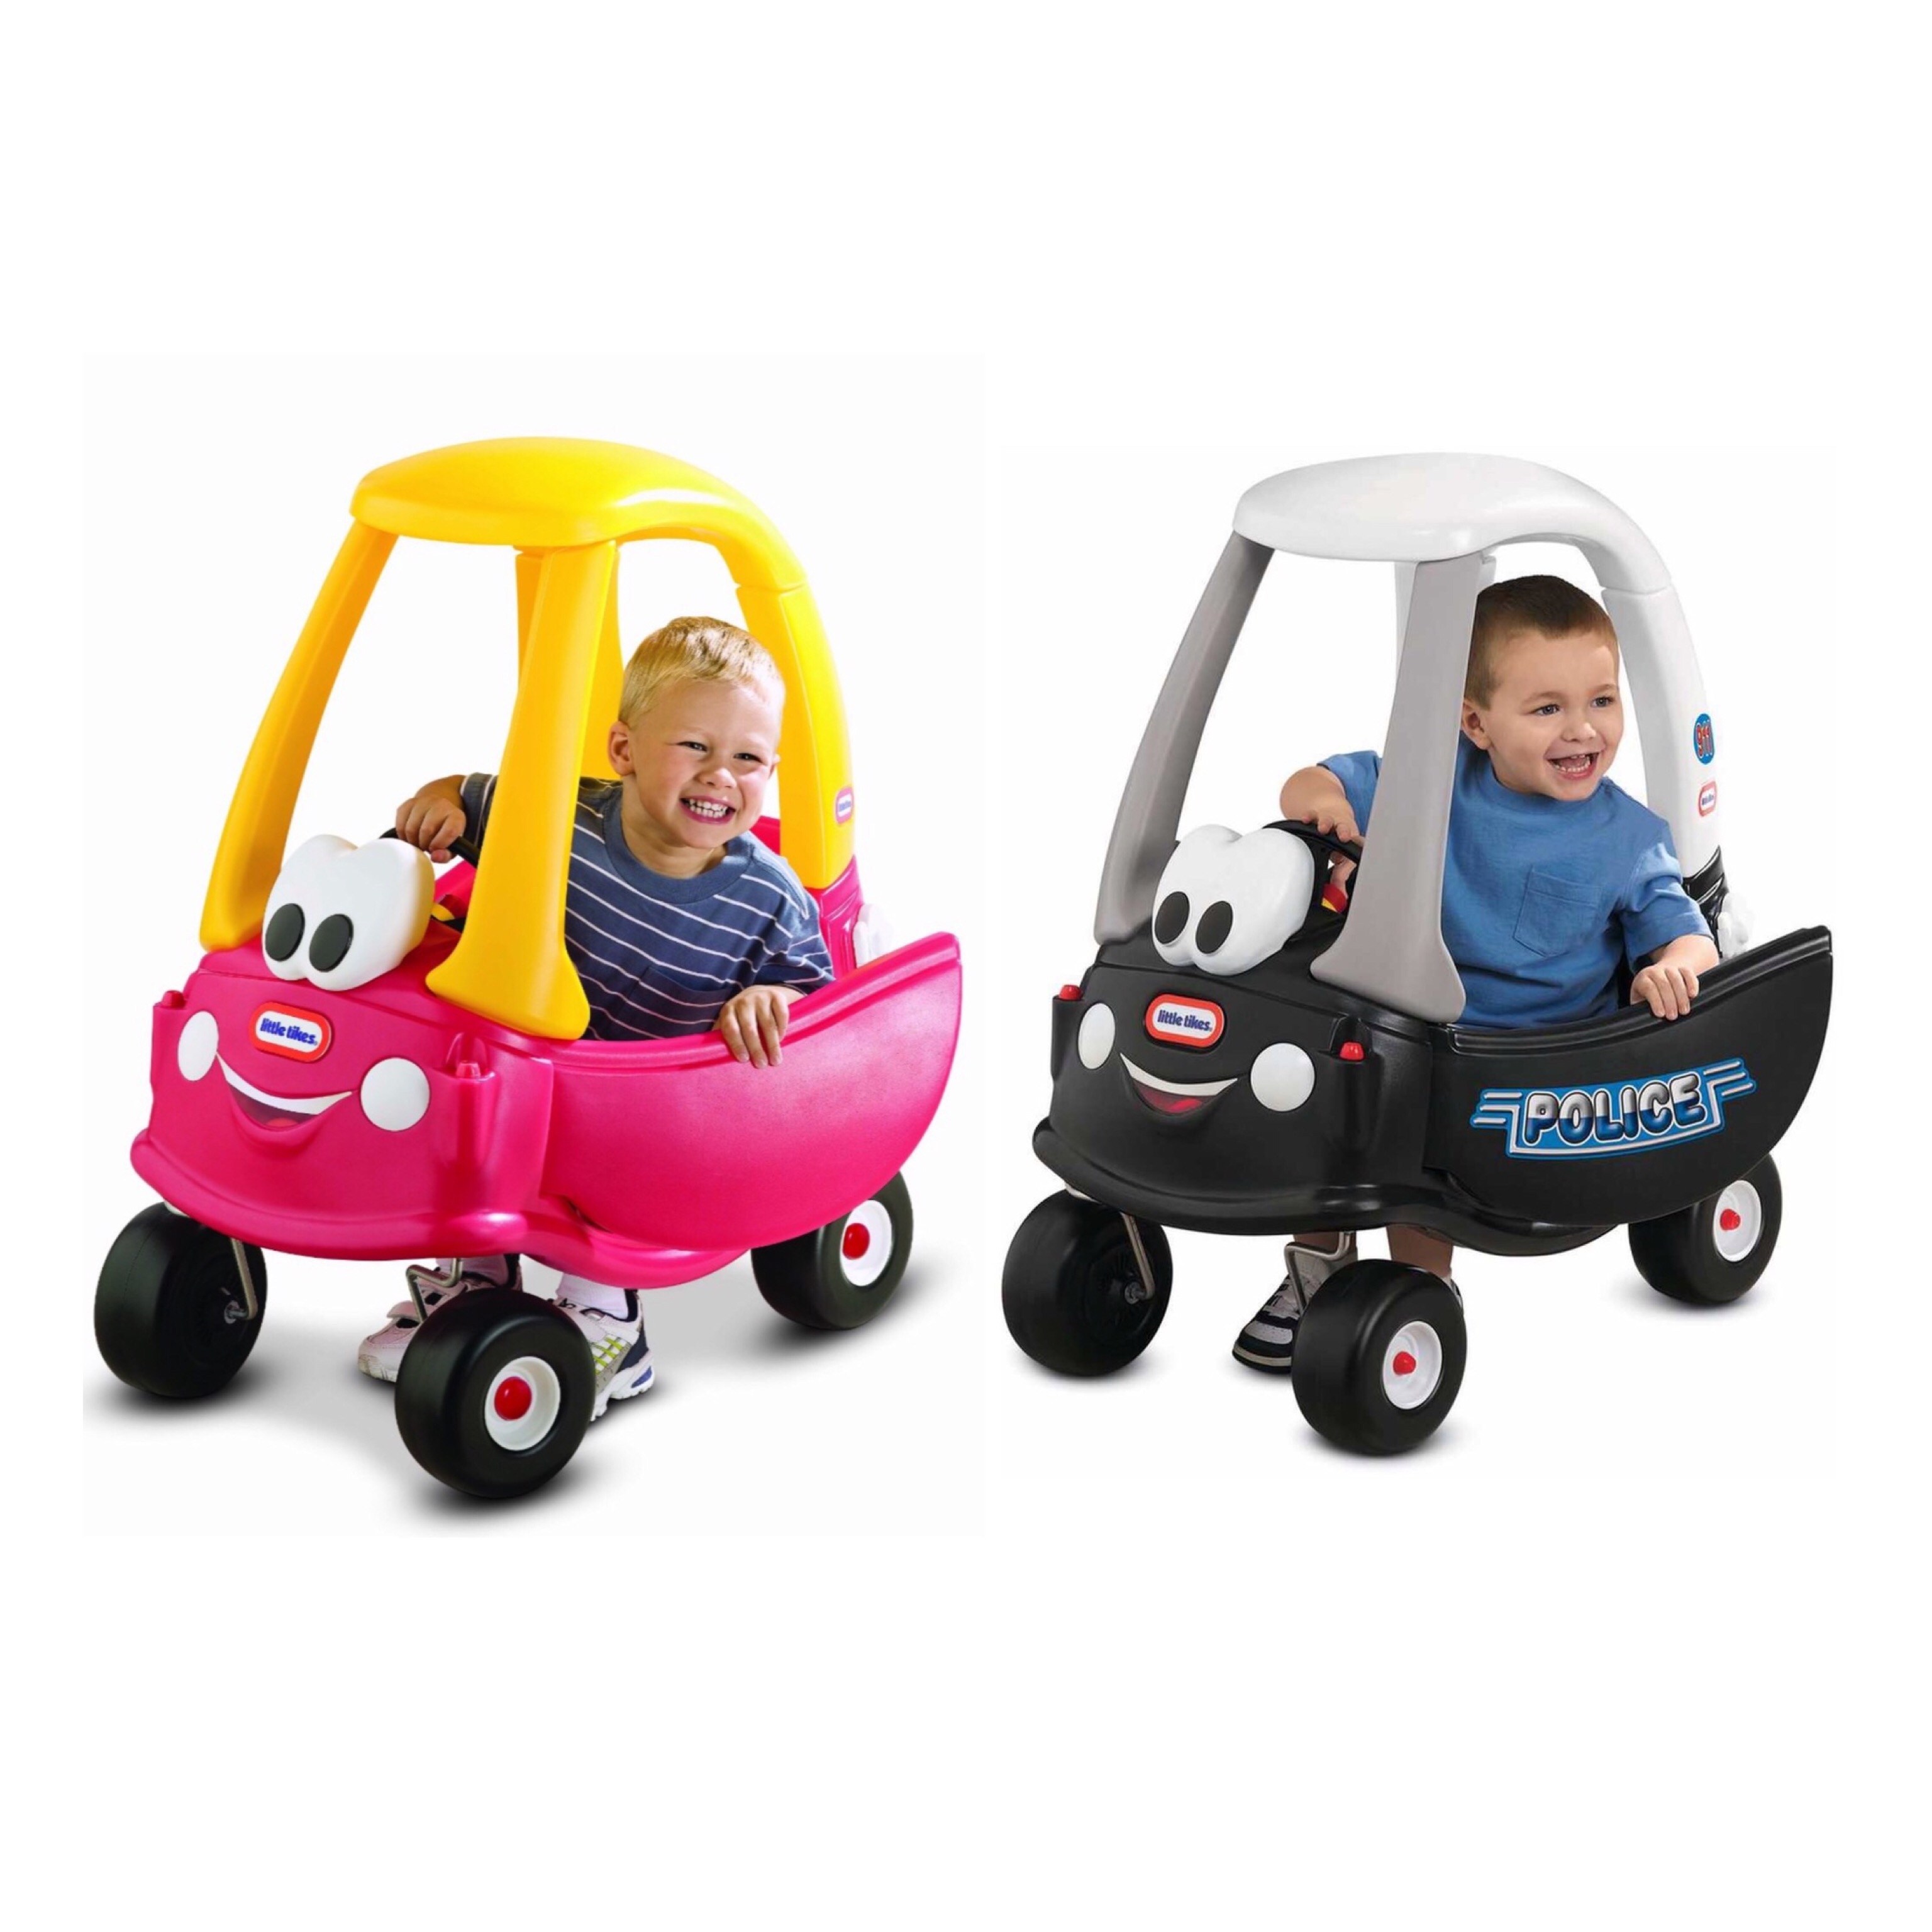 LITTLE TIKES FLINSTONE OR PATROL THEMED COZY COUPES